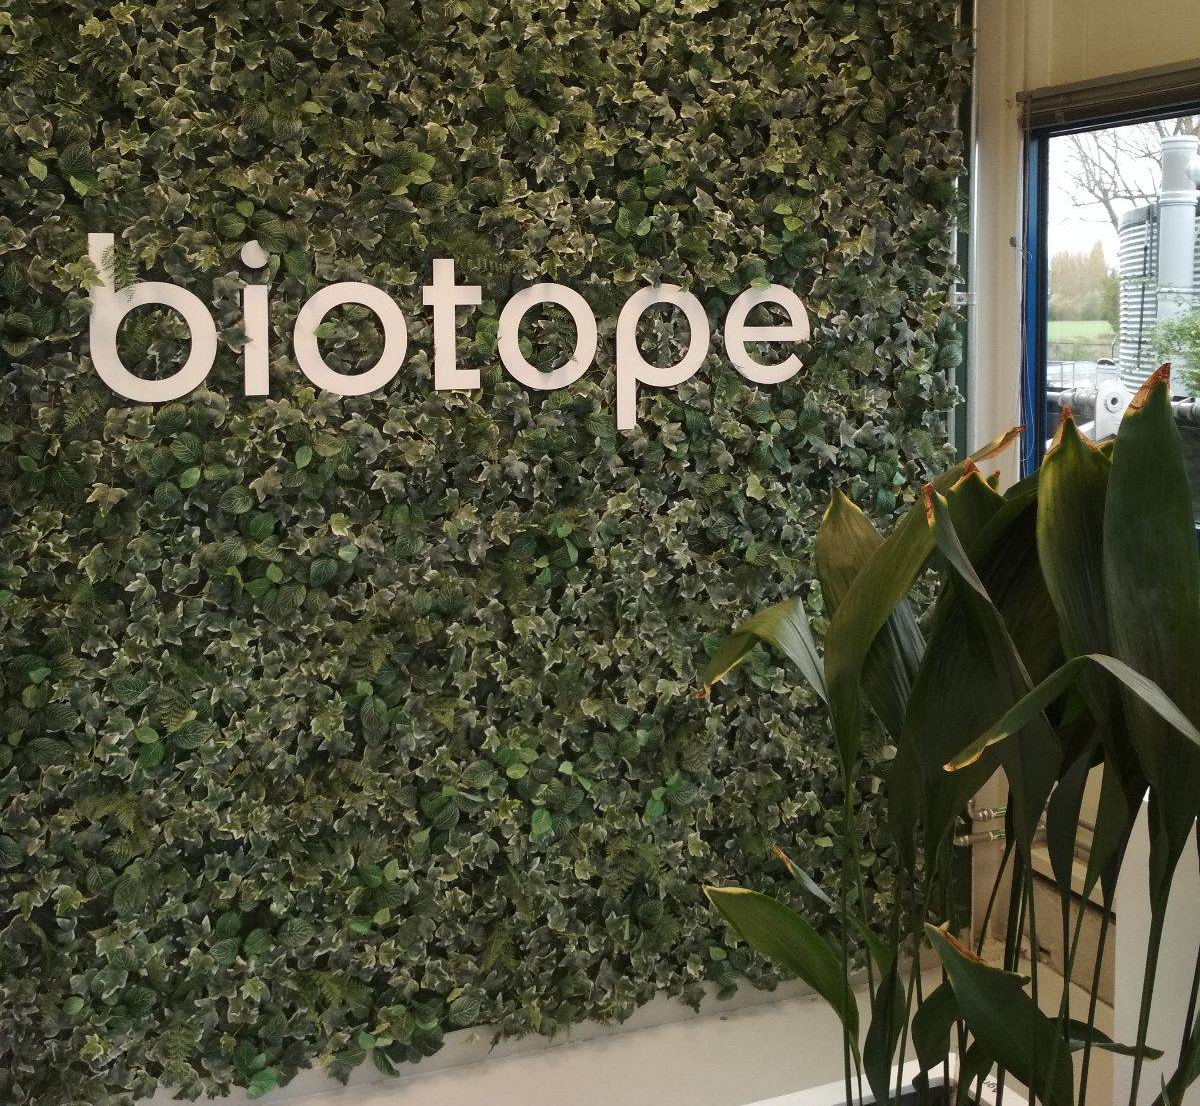 Accepted to Biotope by VIP incubator